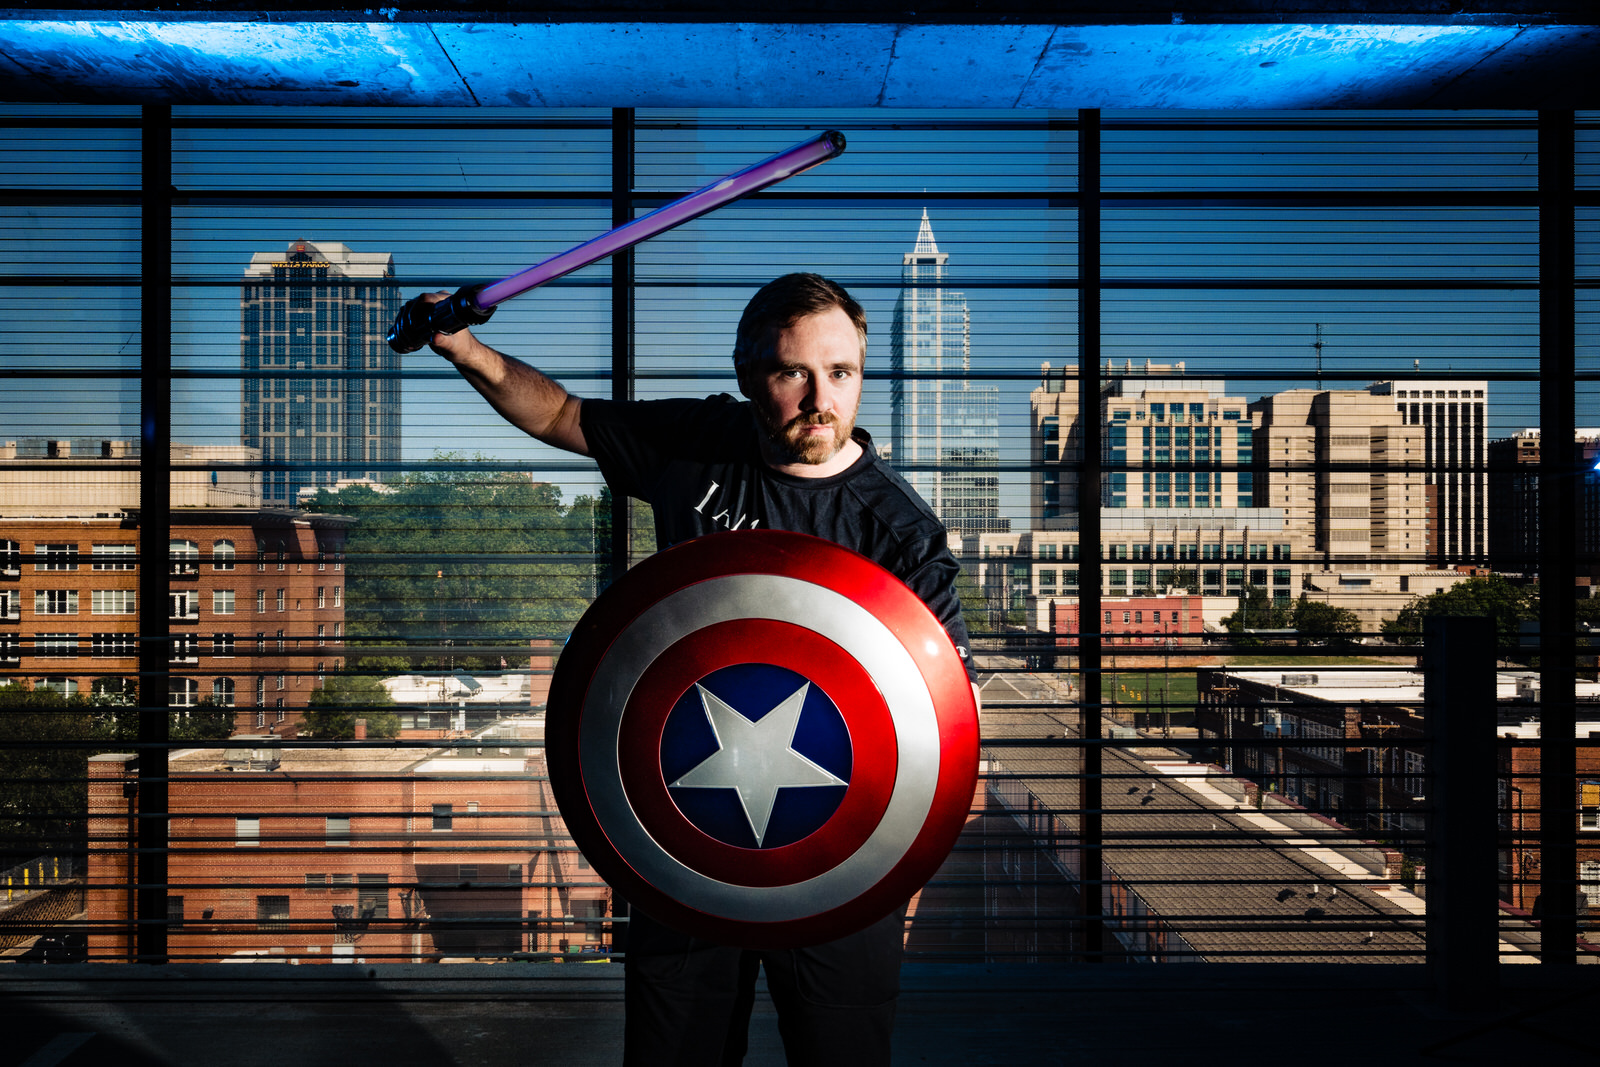 nerdy wedding photographer poses with light saber, captain america shield, and Raleigh skyline